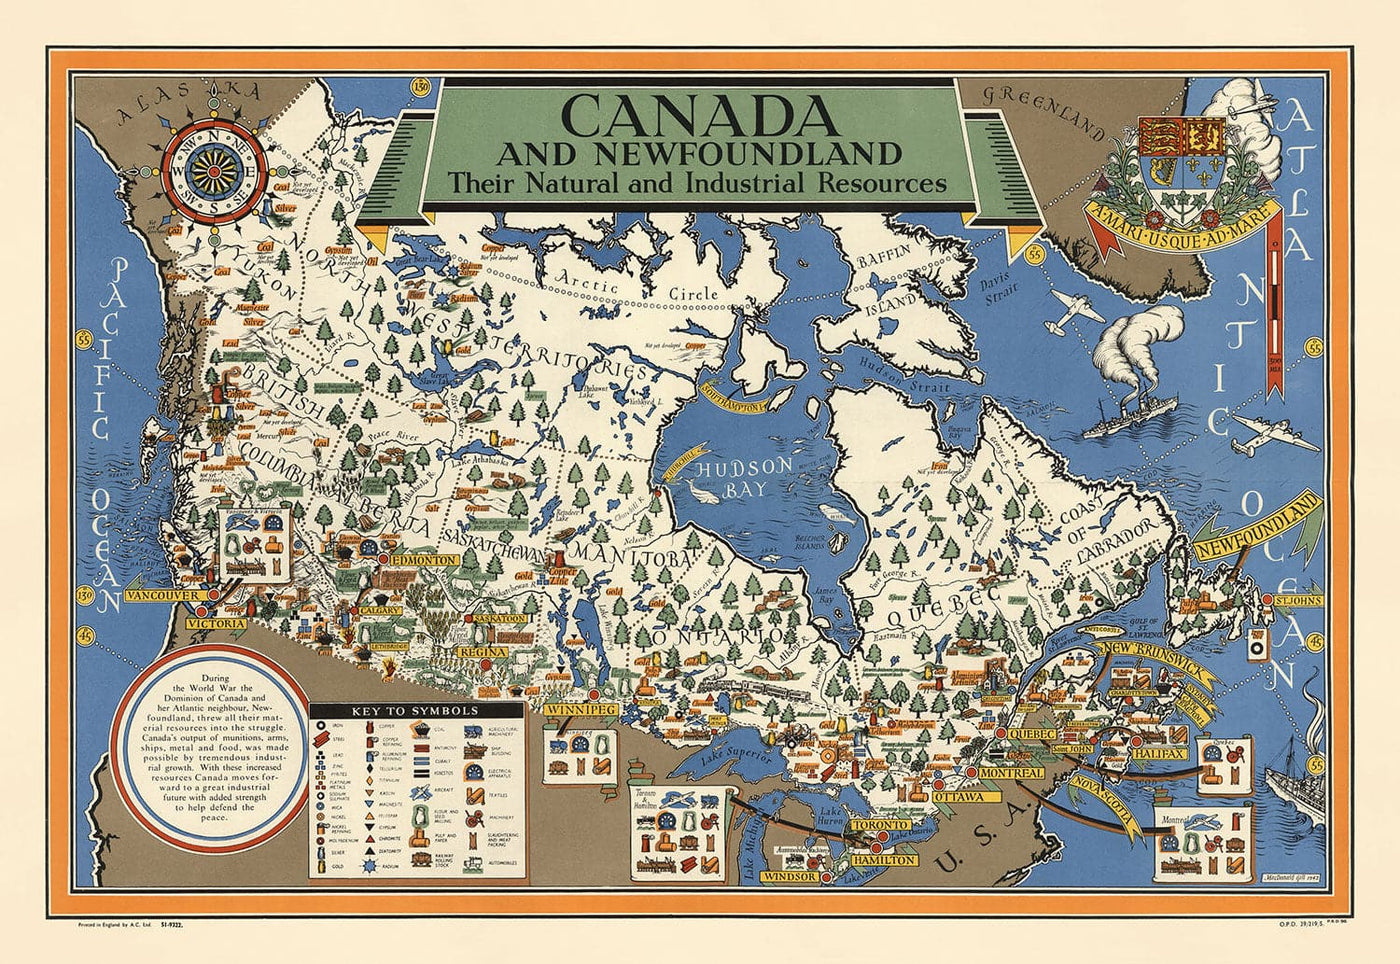 Old Map of Canada, 1942 von Max Gill - World War 2 Map of Natural && Industrial Resources